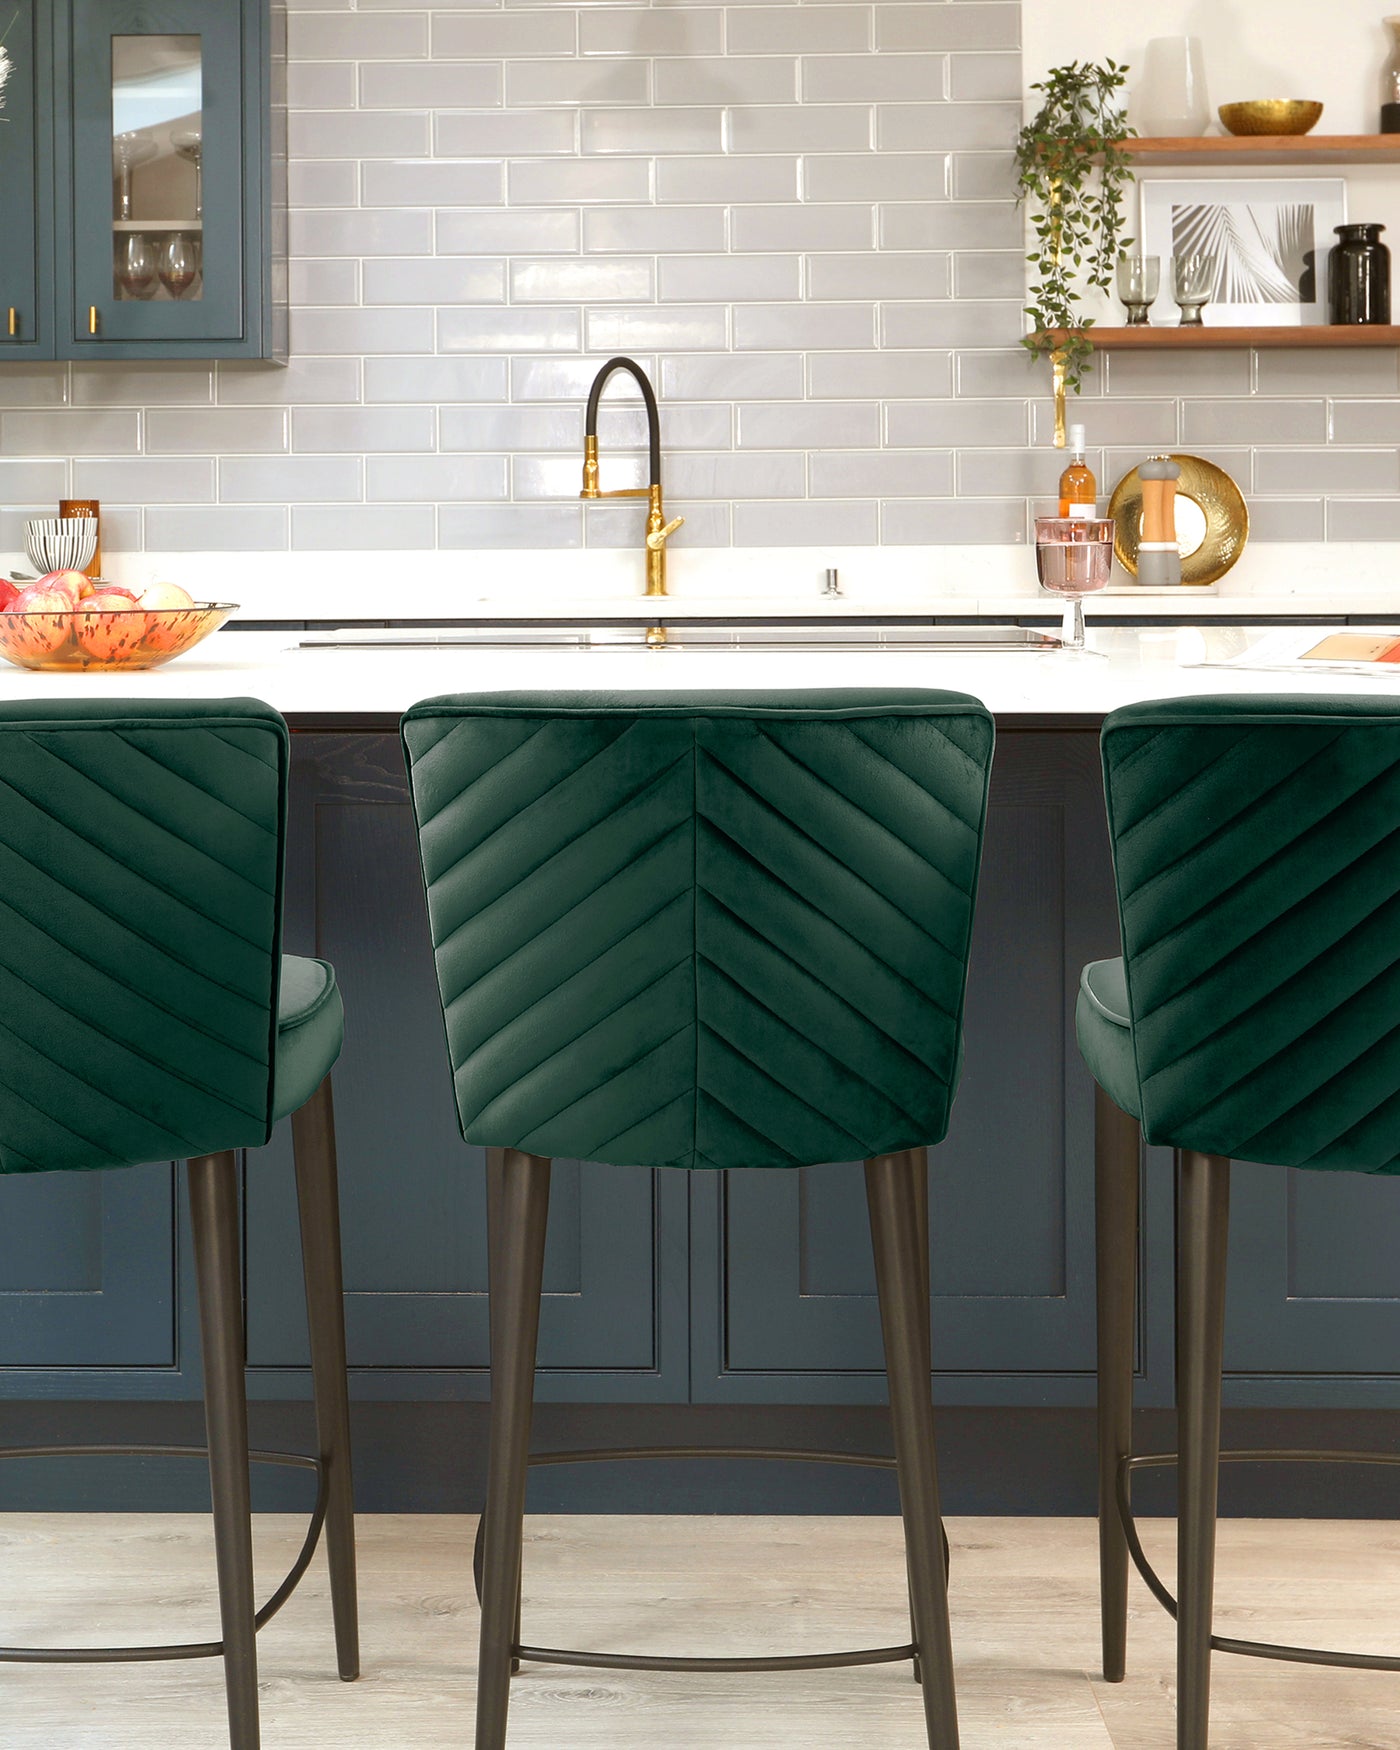 Elegant modern bar stools with plush emerald-green velvet upholstery and a distinctive geometric channel tufting on the backrest. Each stool stands on slender black metal legs with a circular footrest.